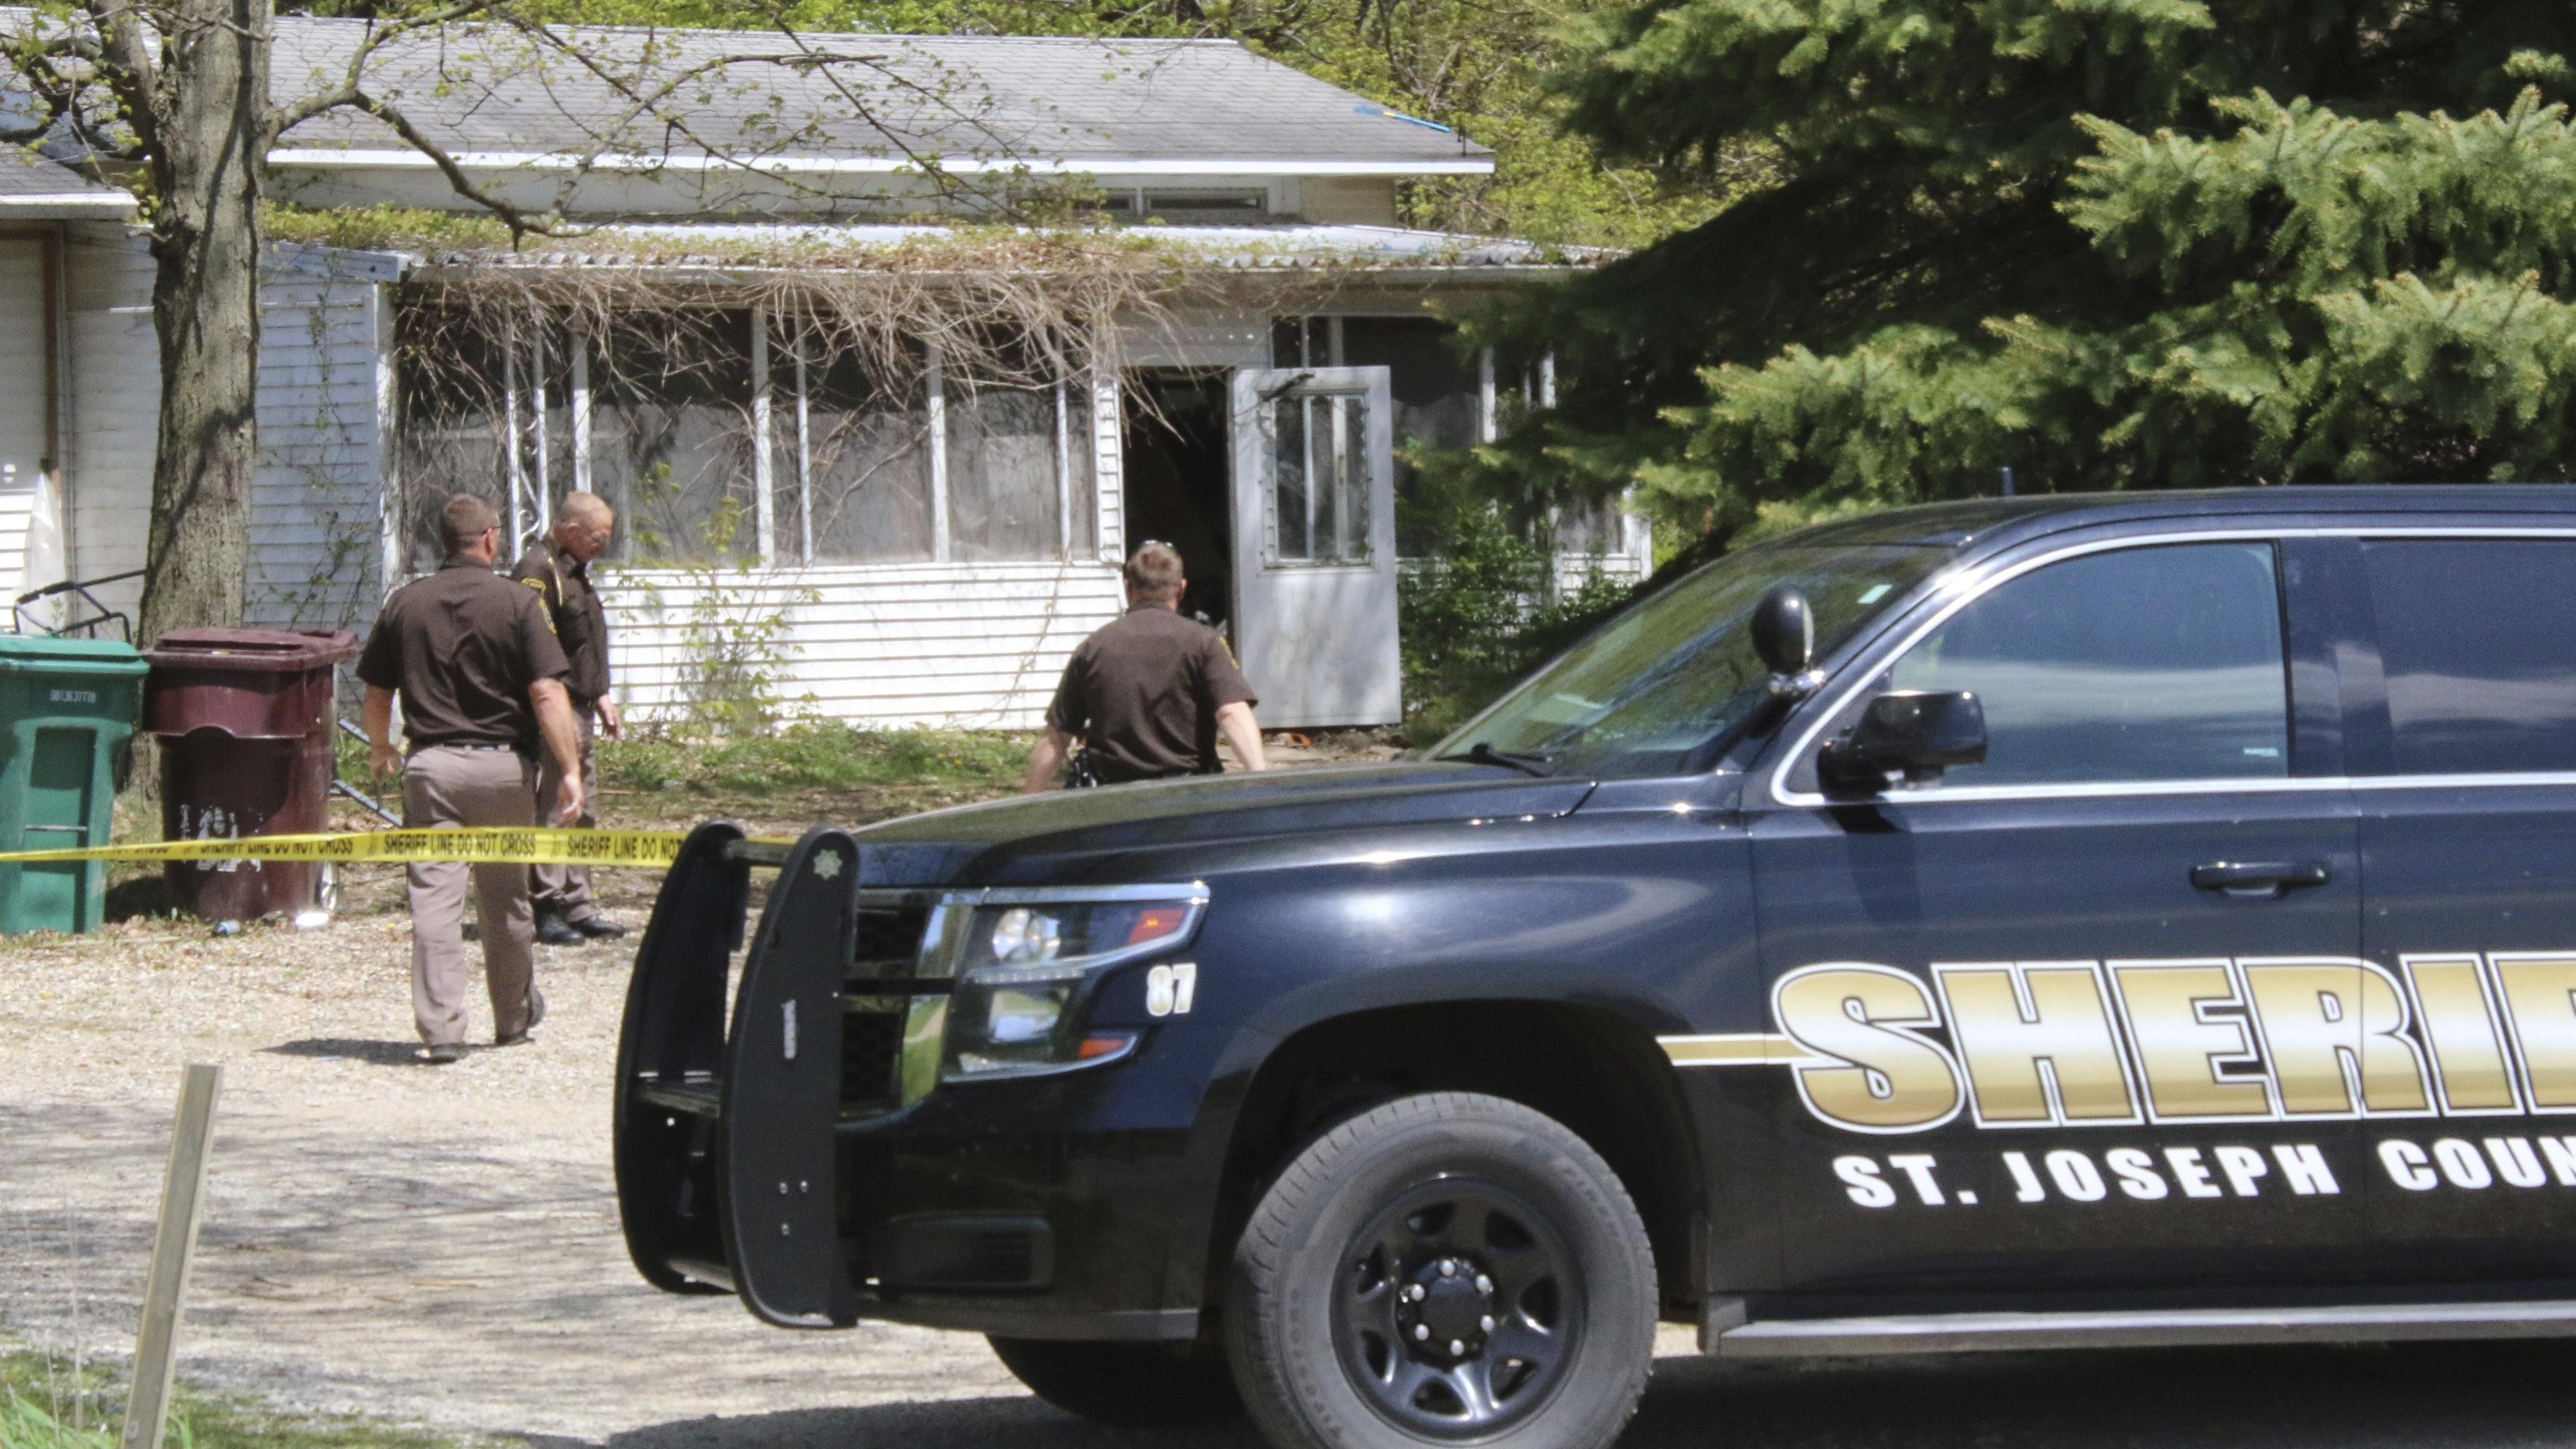 In this Monday, May 6, 2019 photo, St. Joseph County Sheriff deputies stand outside the site where a woman was fatally shot in Fawn River Township, Mich. Authorities say a 9-year-old is suspected in the shooting of a woman in her southern Michigan home.